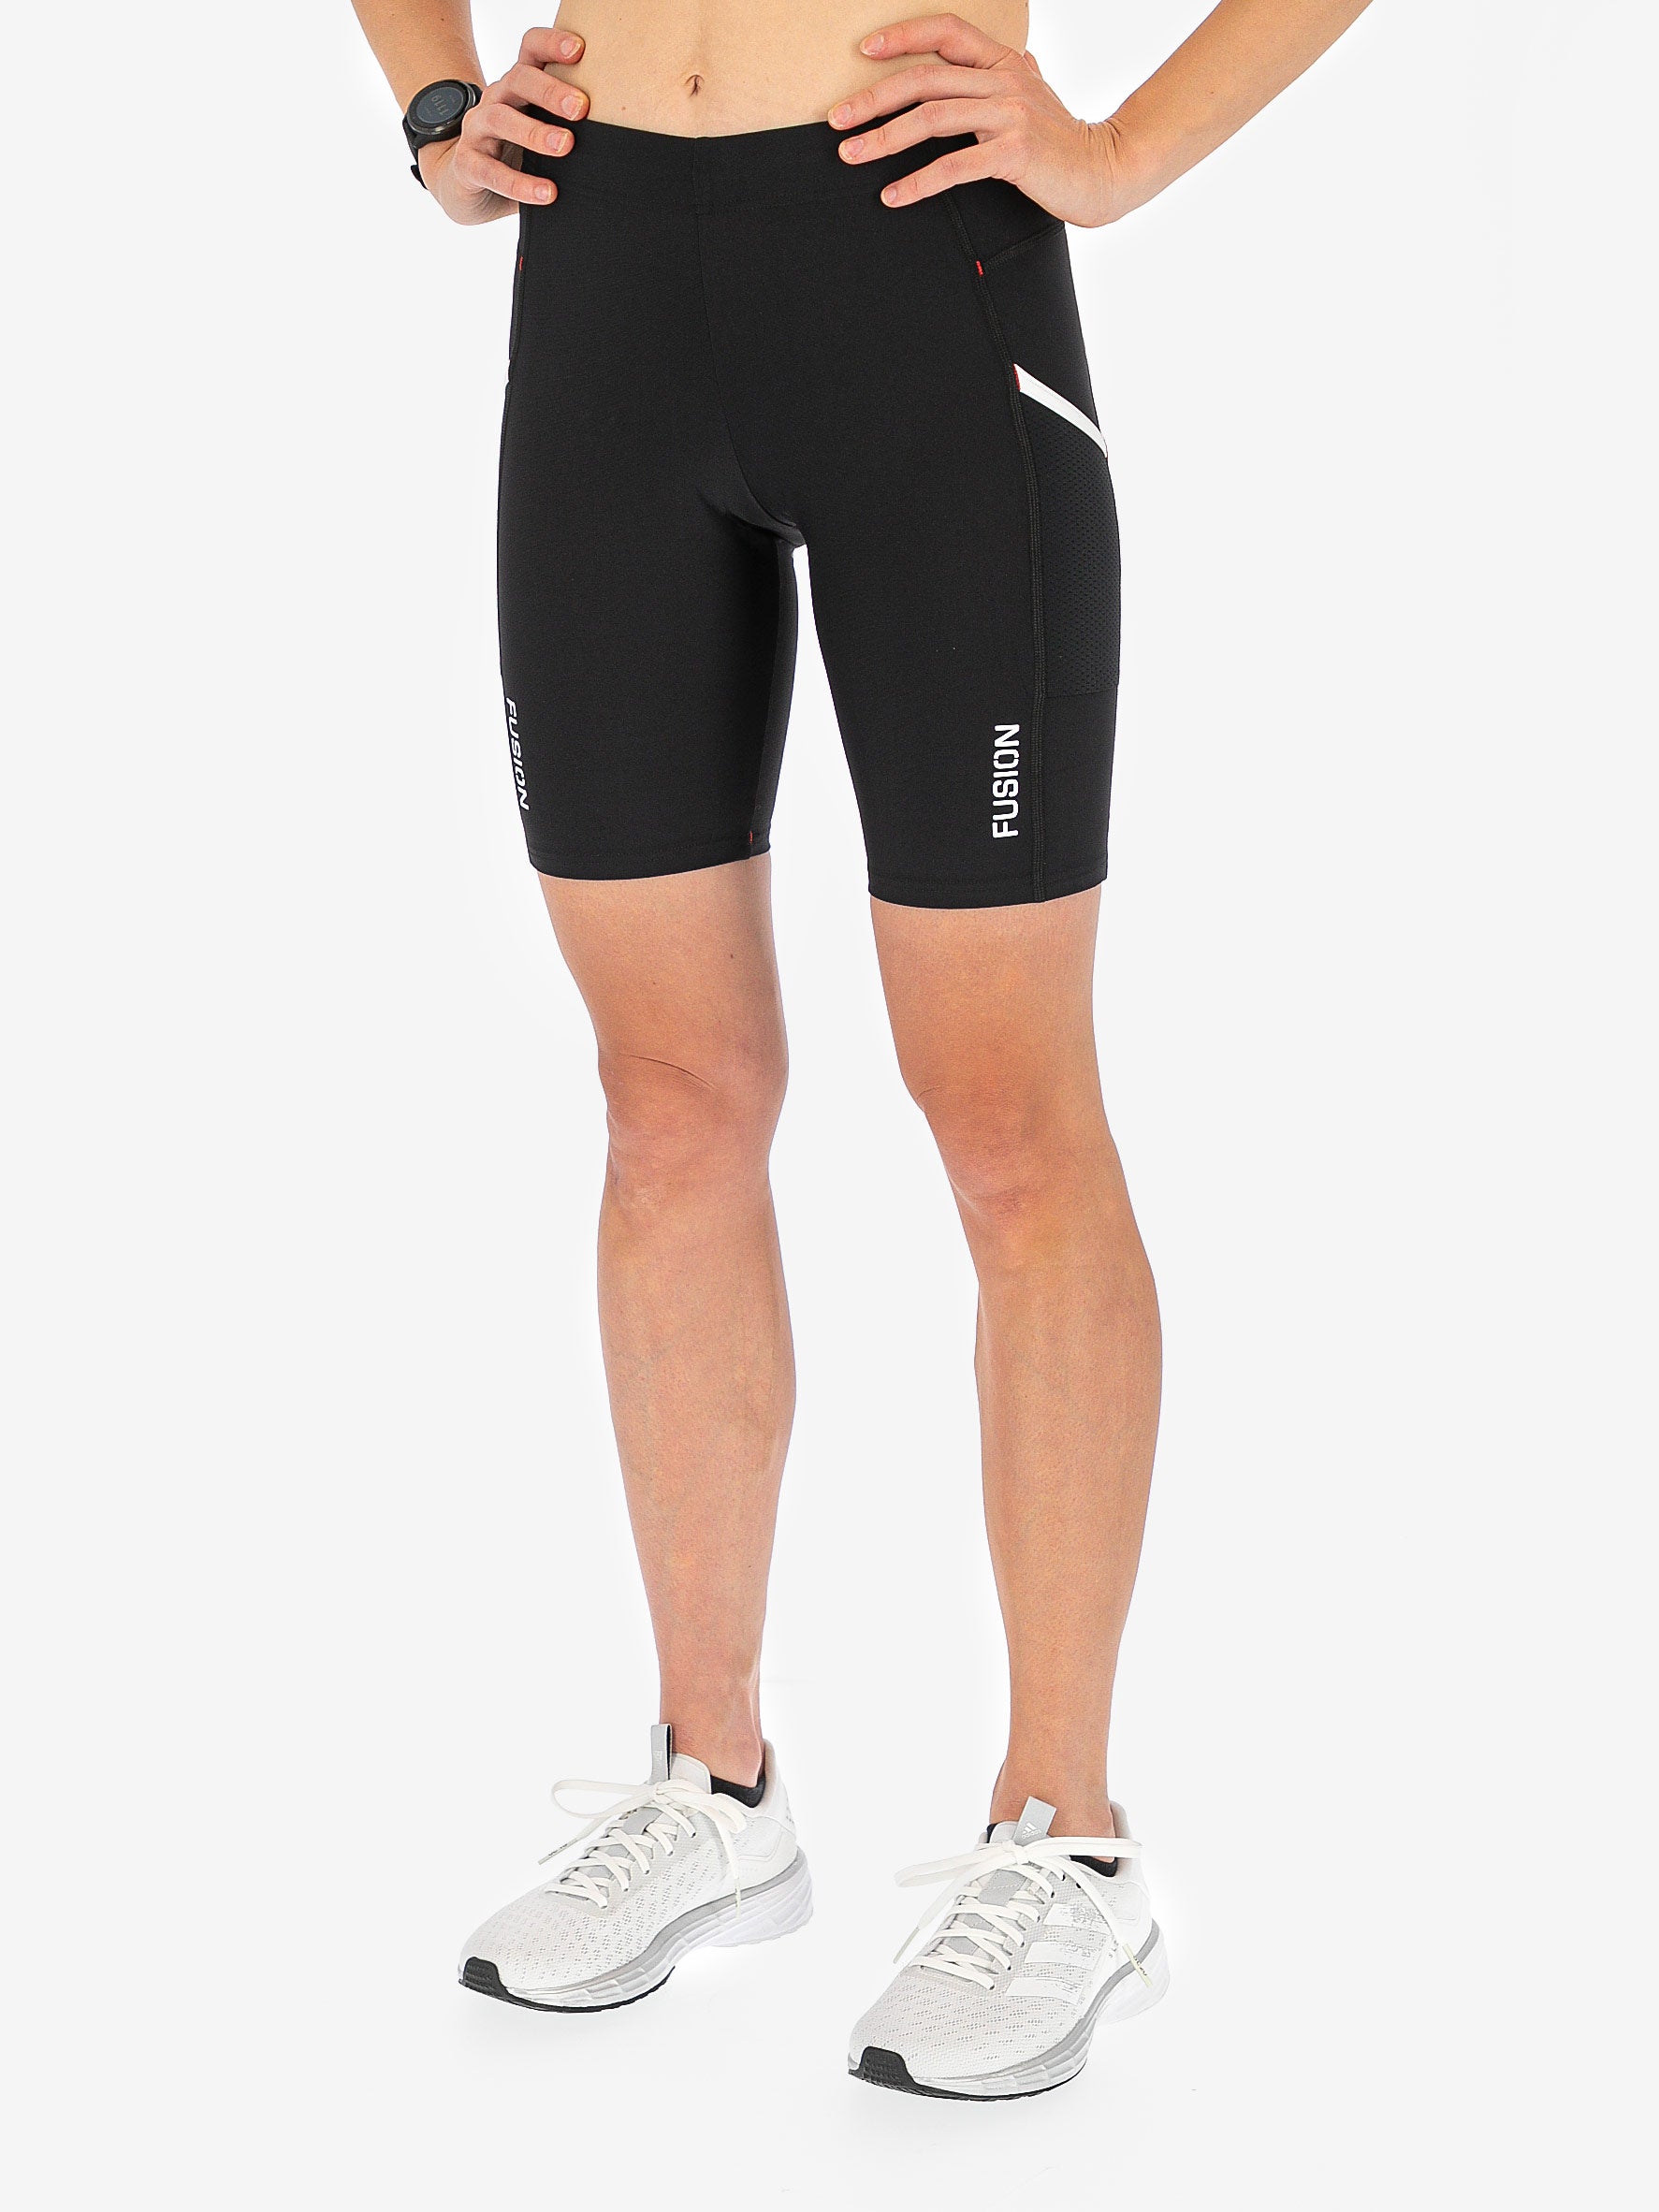 Fusion C3 Short Tights Unisex Running Trousers with Side Pockets (XS) :  : Fashion